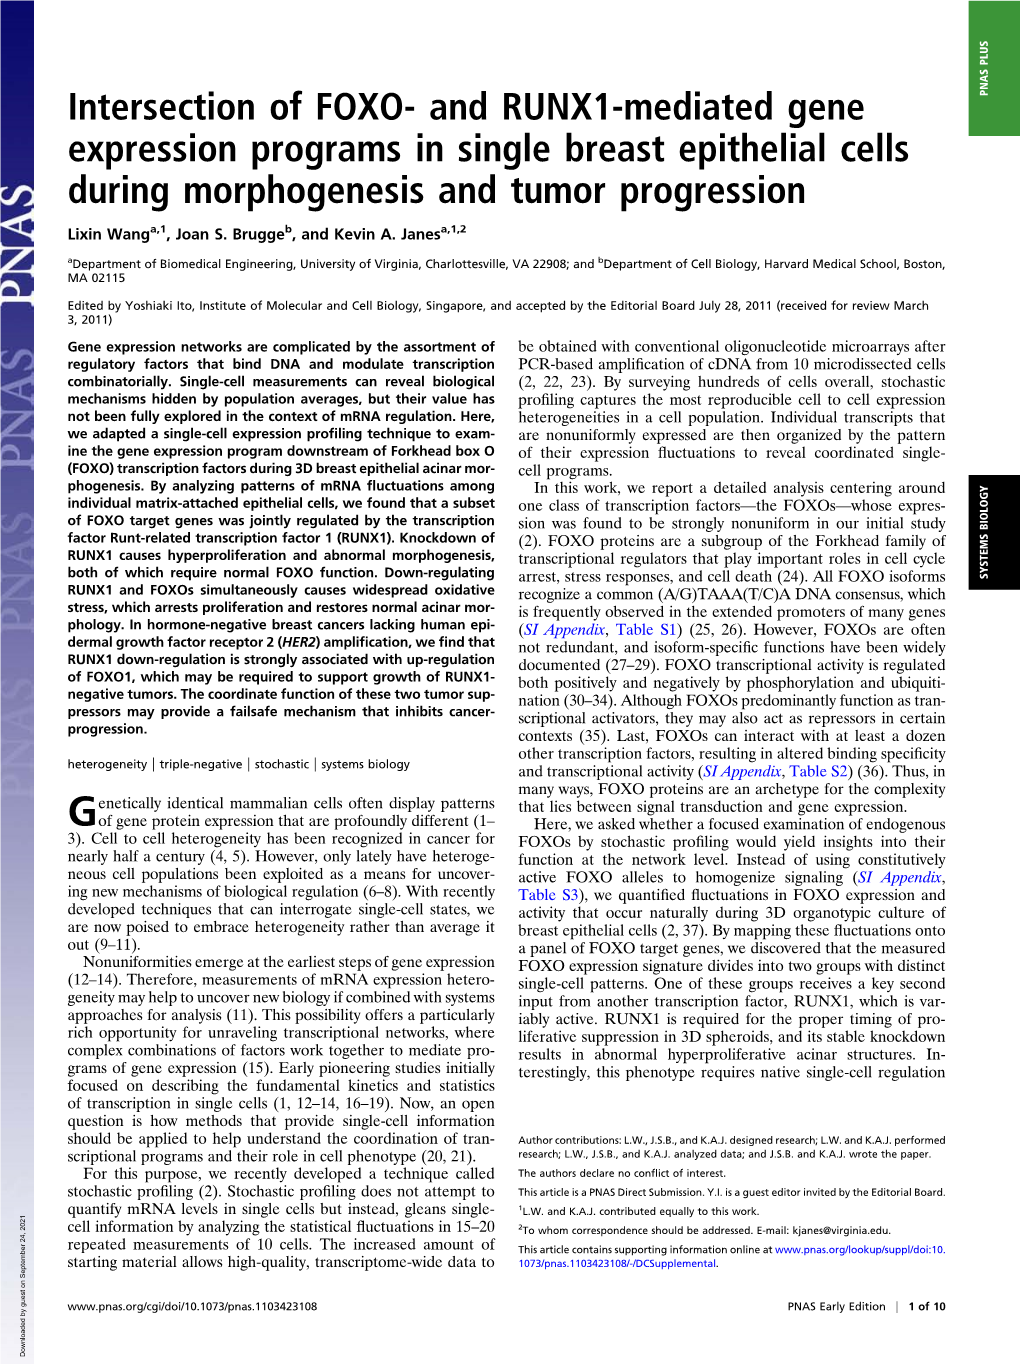 Intersection of FOXO- and RUNX1-Mediated Gene PNAS PLUS Expression Programs in Single Breast Epithelial Cells During Morphogenesis and Tumor Progression